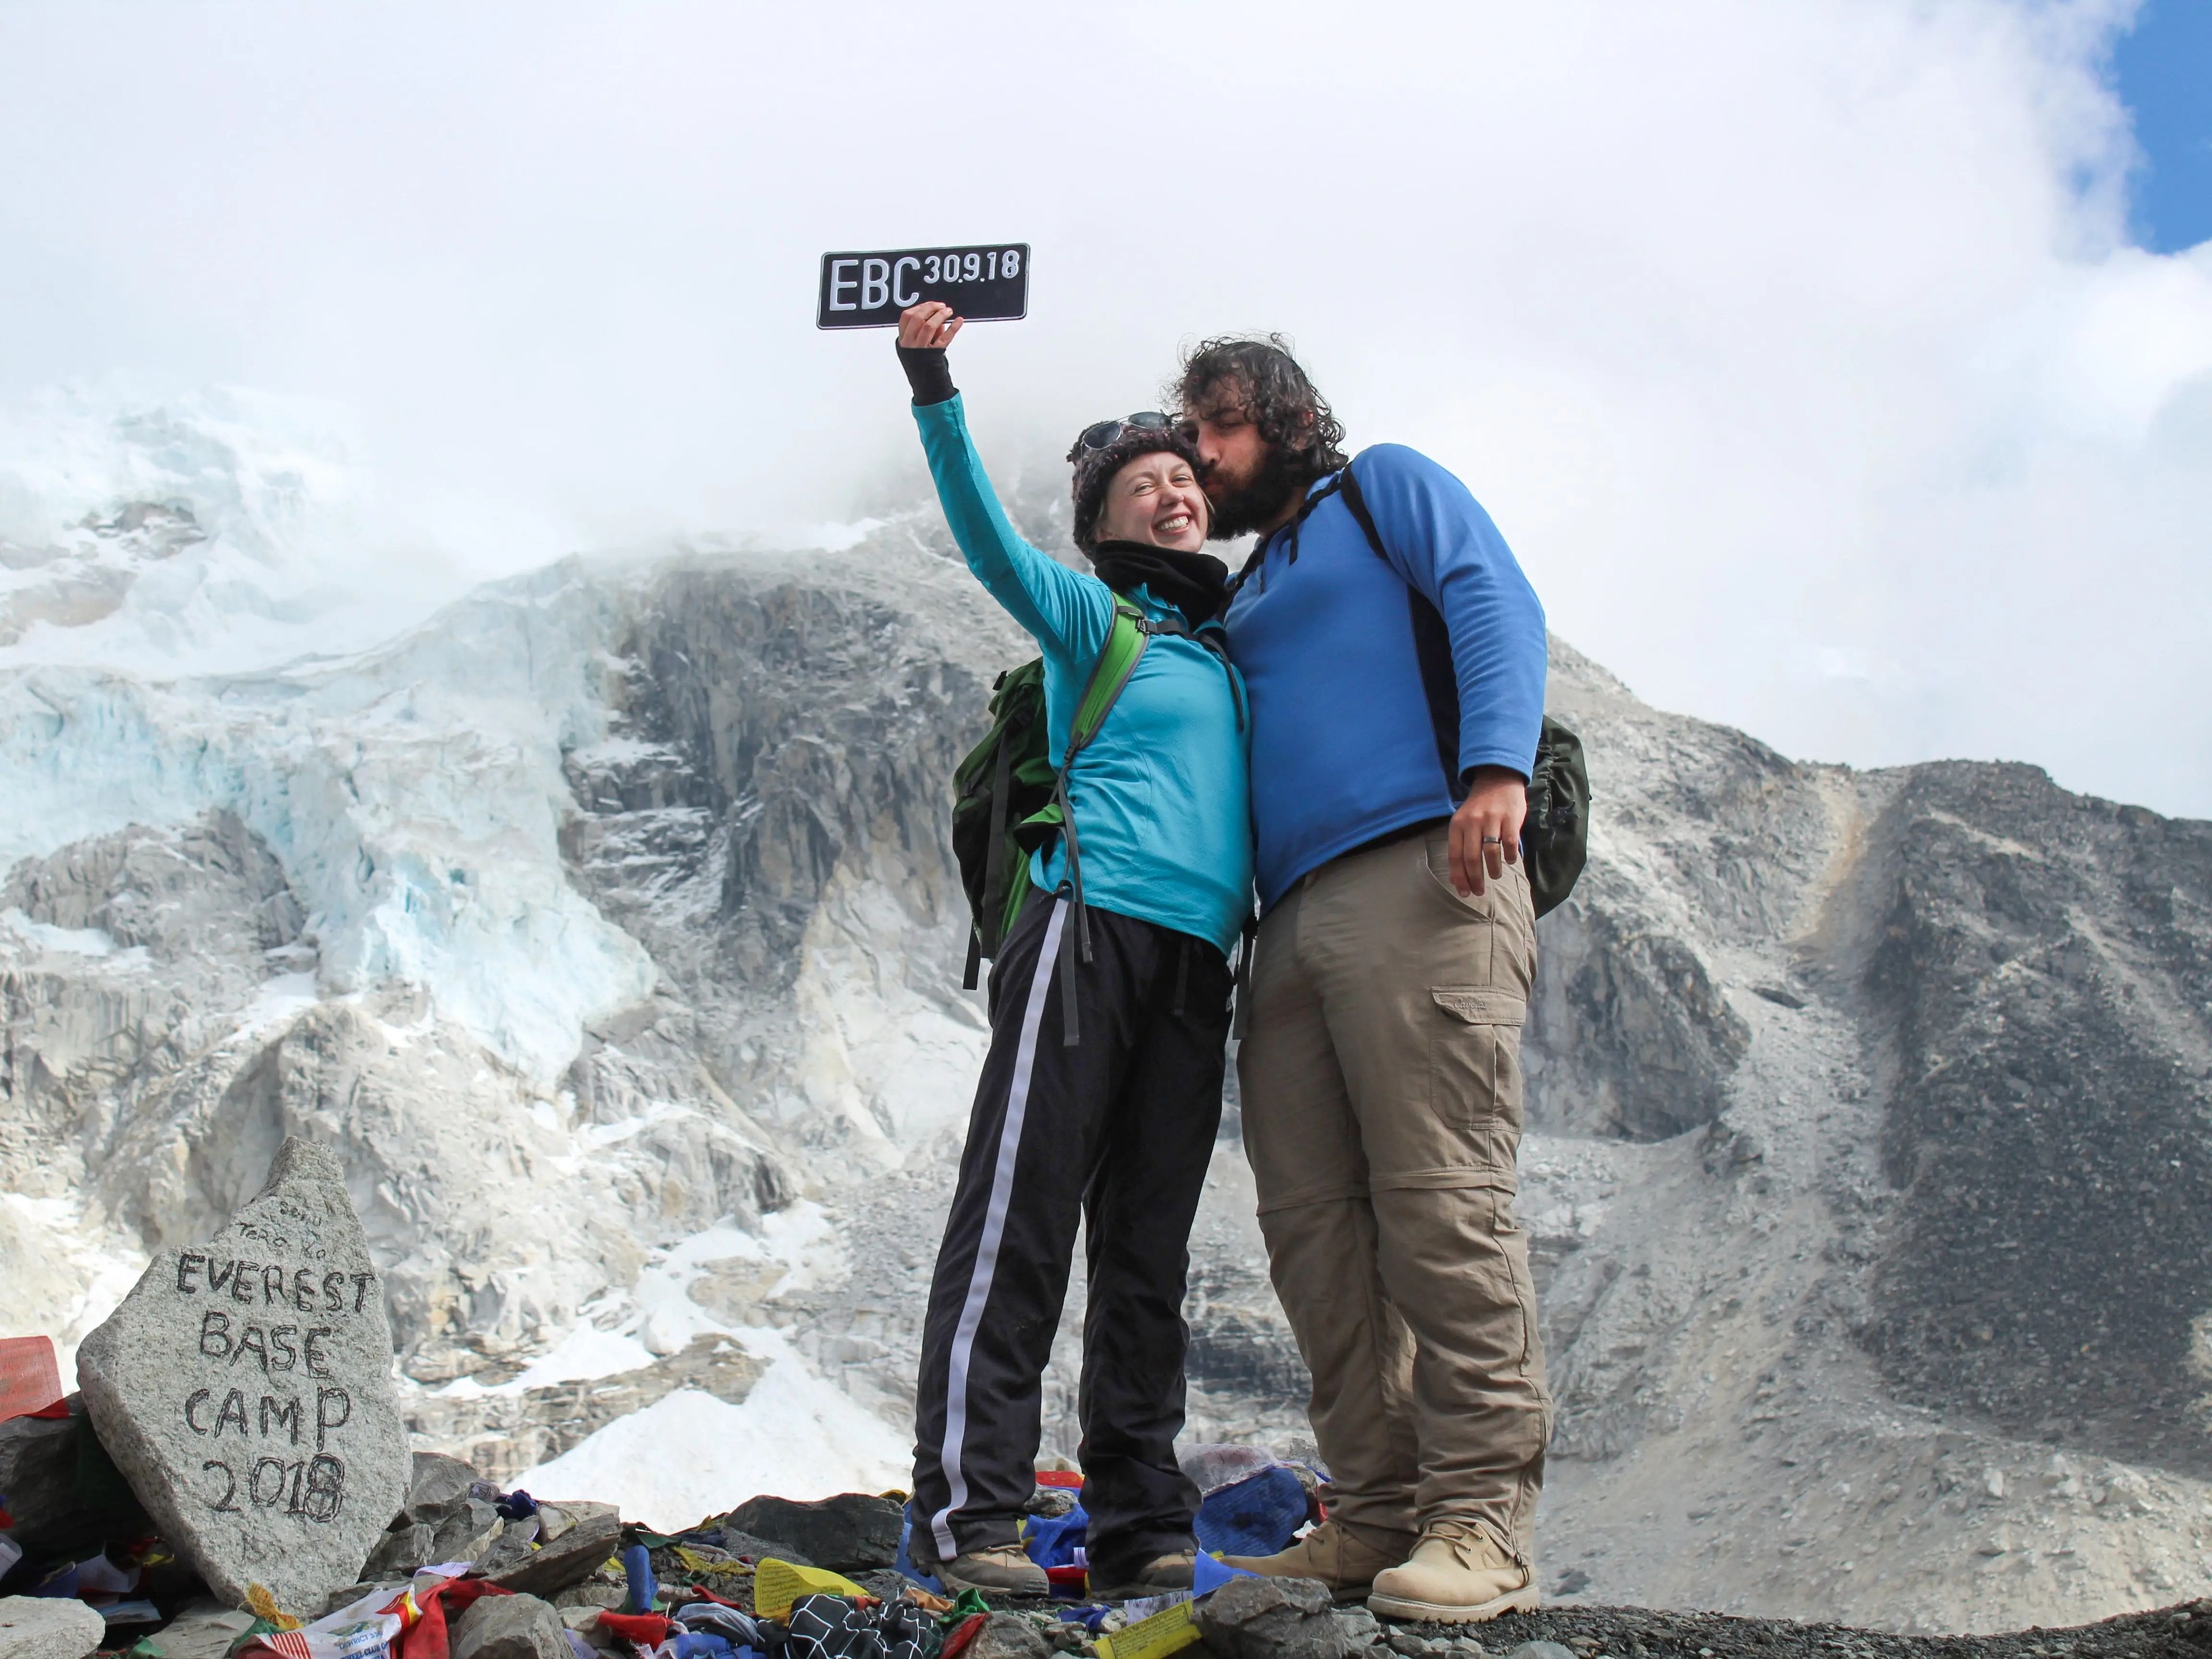 Alex's husband kisses her cheek on the top of a mountain while she holds a sign that reads "EBC 30.9.19." The rock next to them has an inscription that reads "Everest Base Camp 2018."